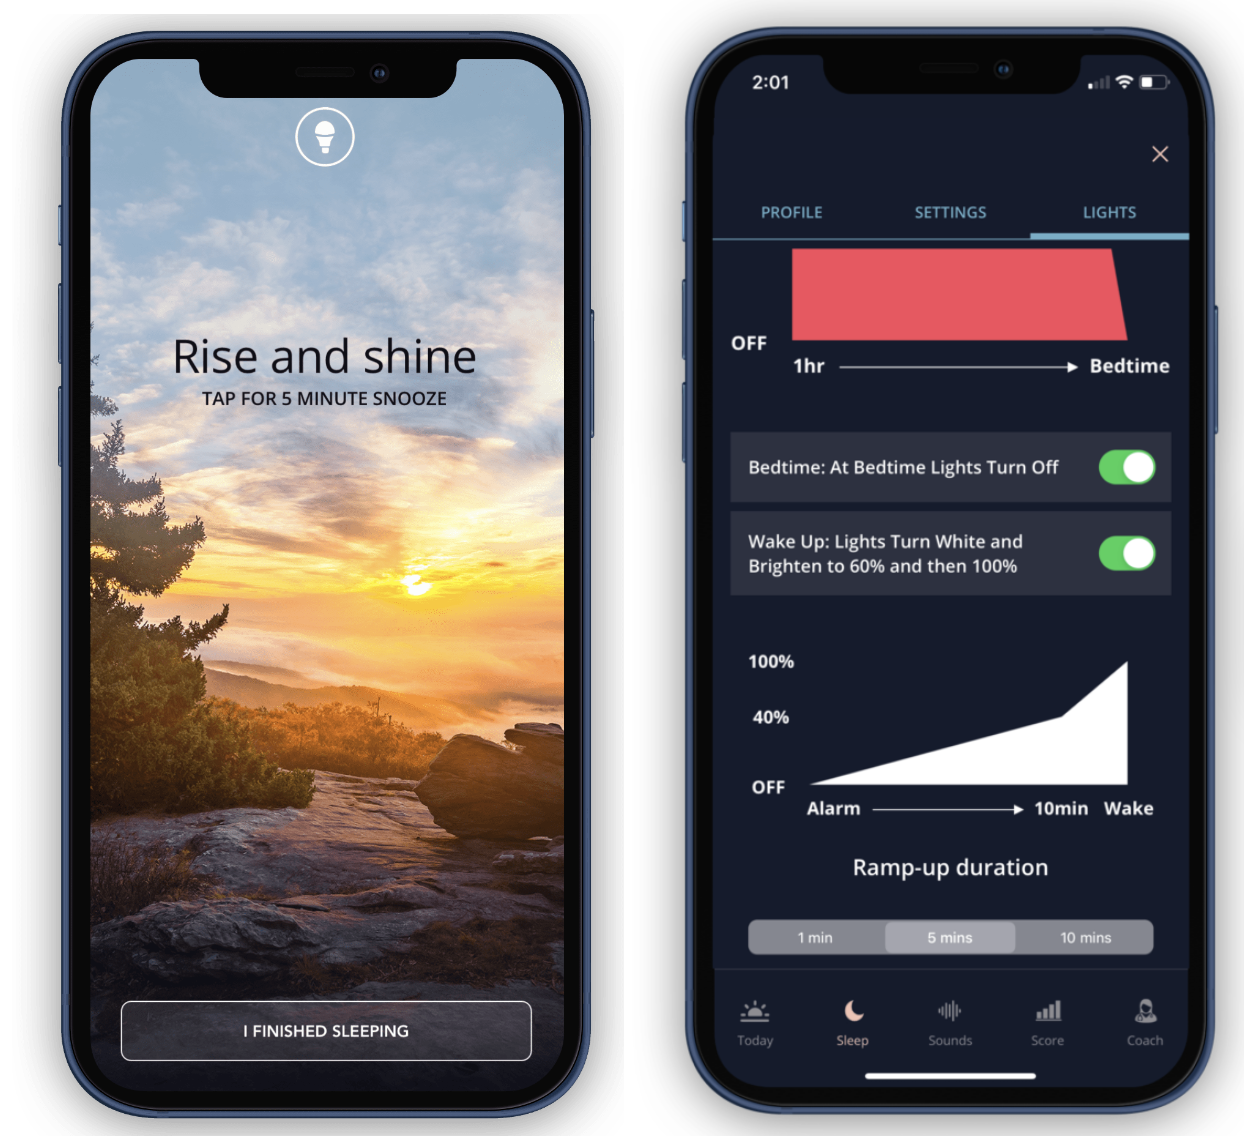 SleepSpace Smart Wake Up Alarm Clock Screenshots and The Ability to Adjust the duration of the wake up window